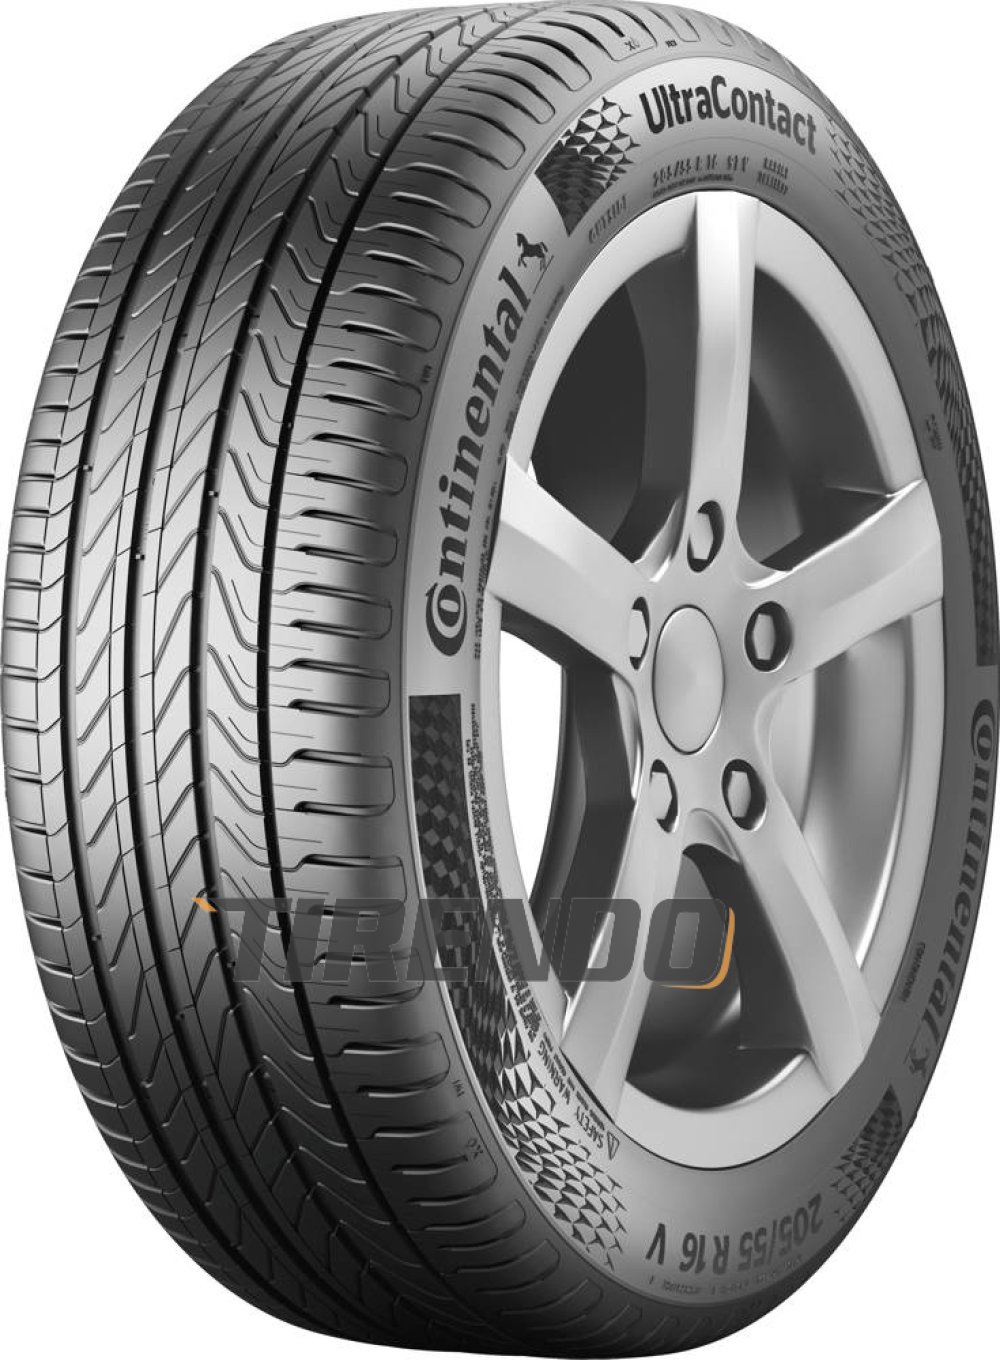 Image of Continental UltraContact ( 215/45 R18 93W XL EVc )